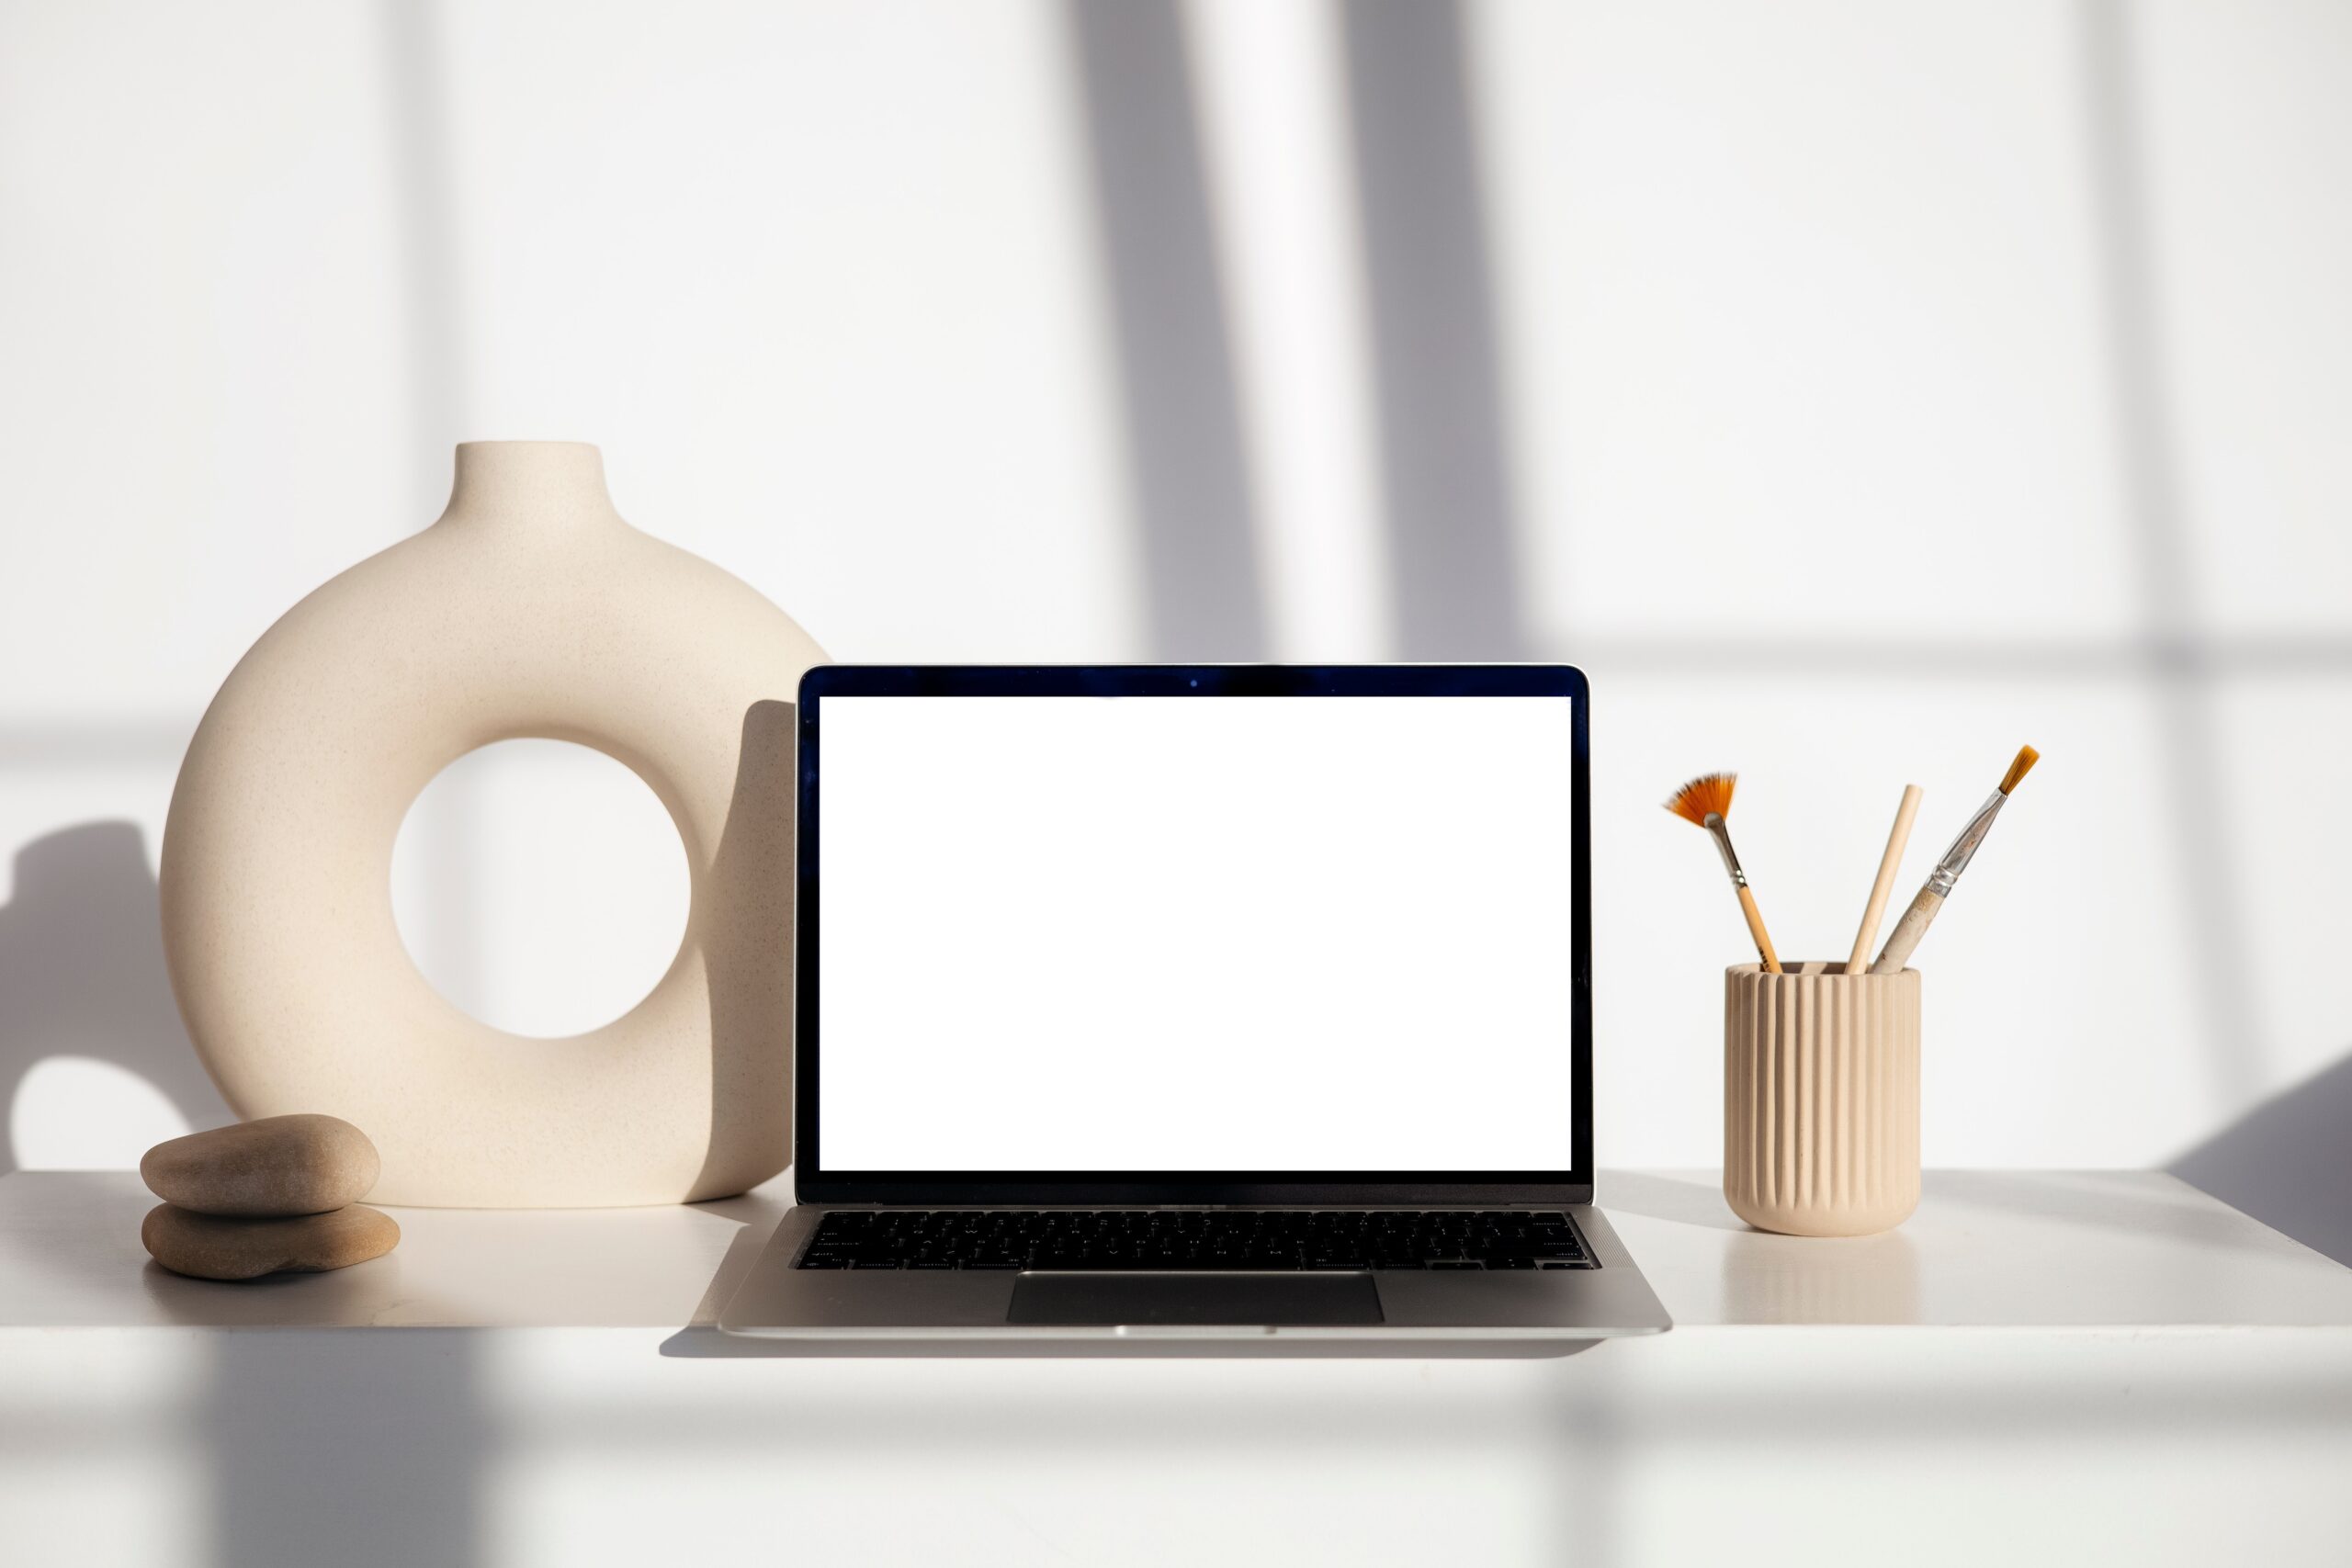 Open laptop with email about trading online voucher and a beige circular vase and a pencil holder